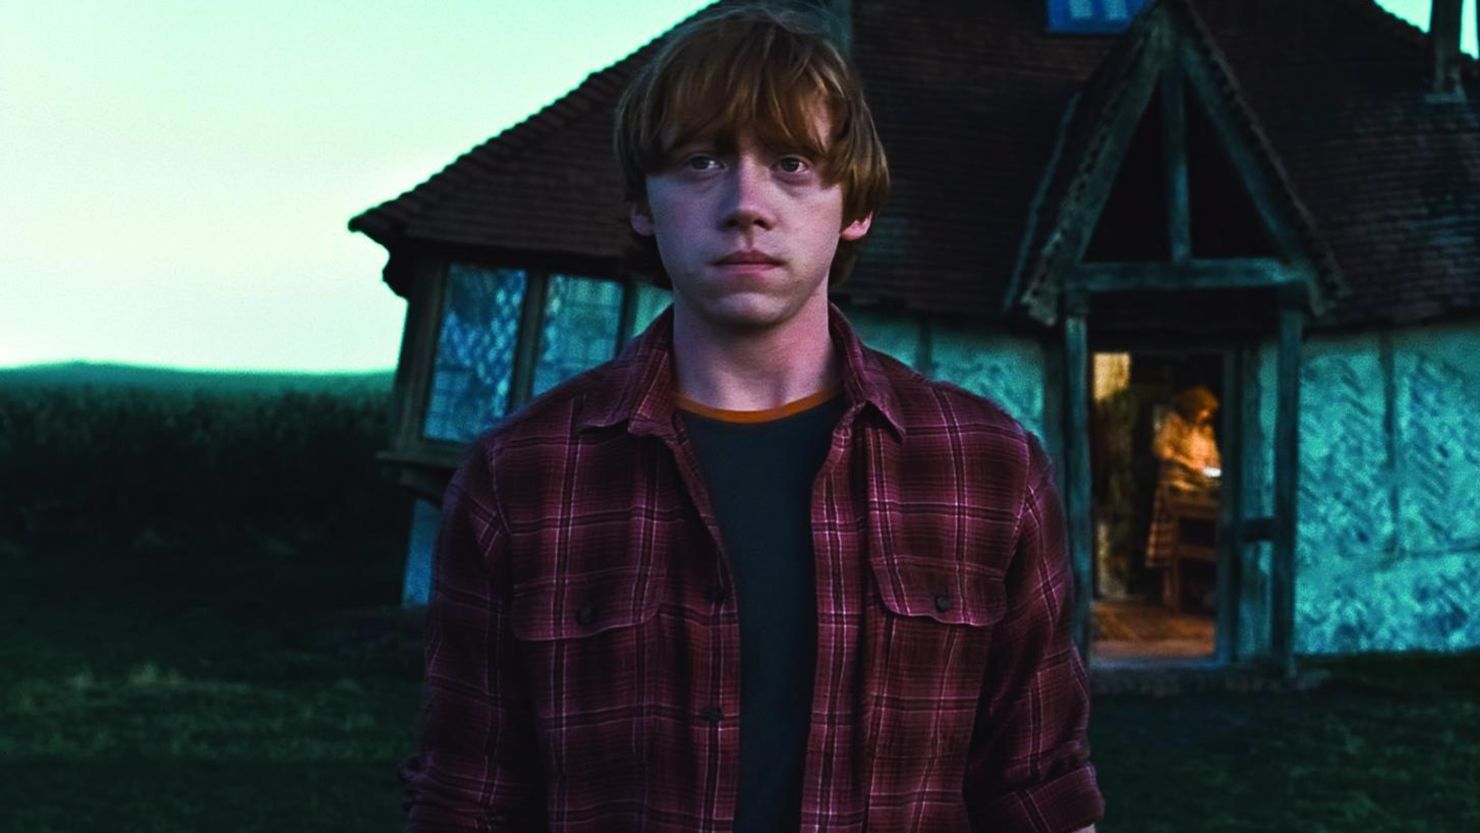 J.K. Rowling doesn't specify in what context she was picturing Ron's death.